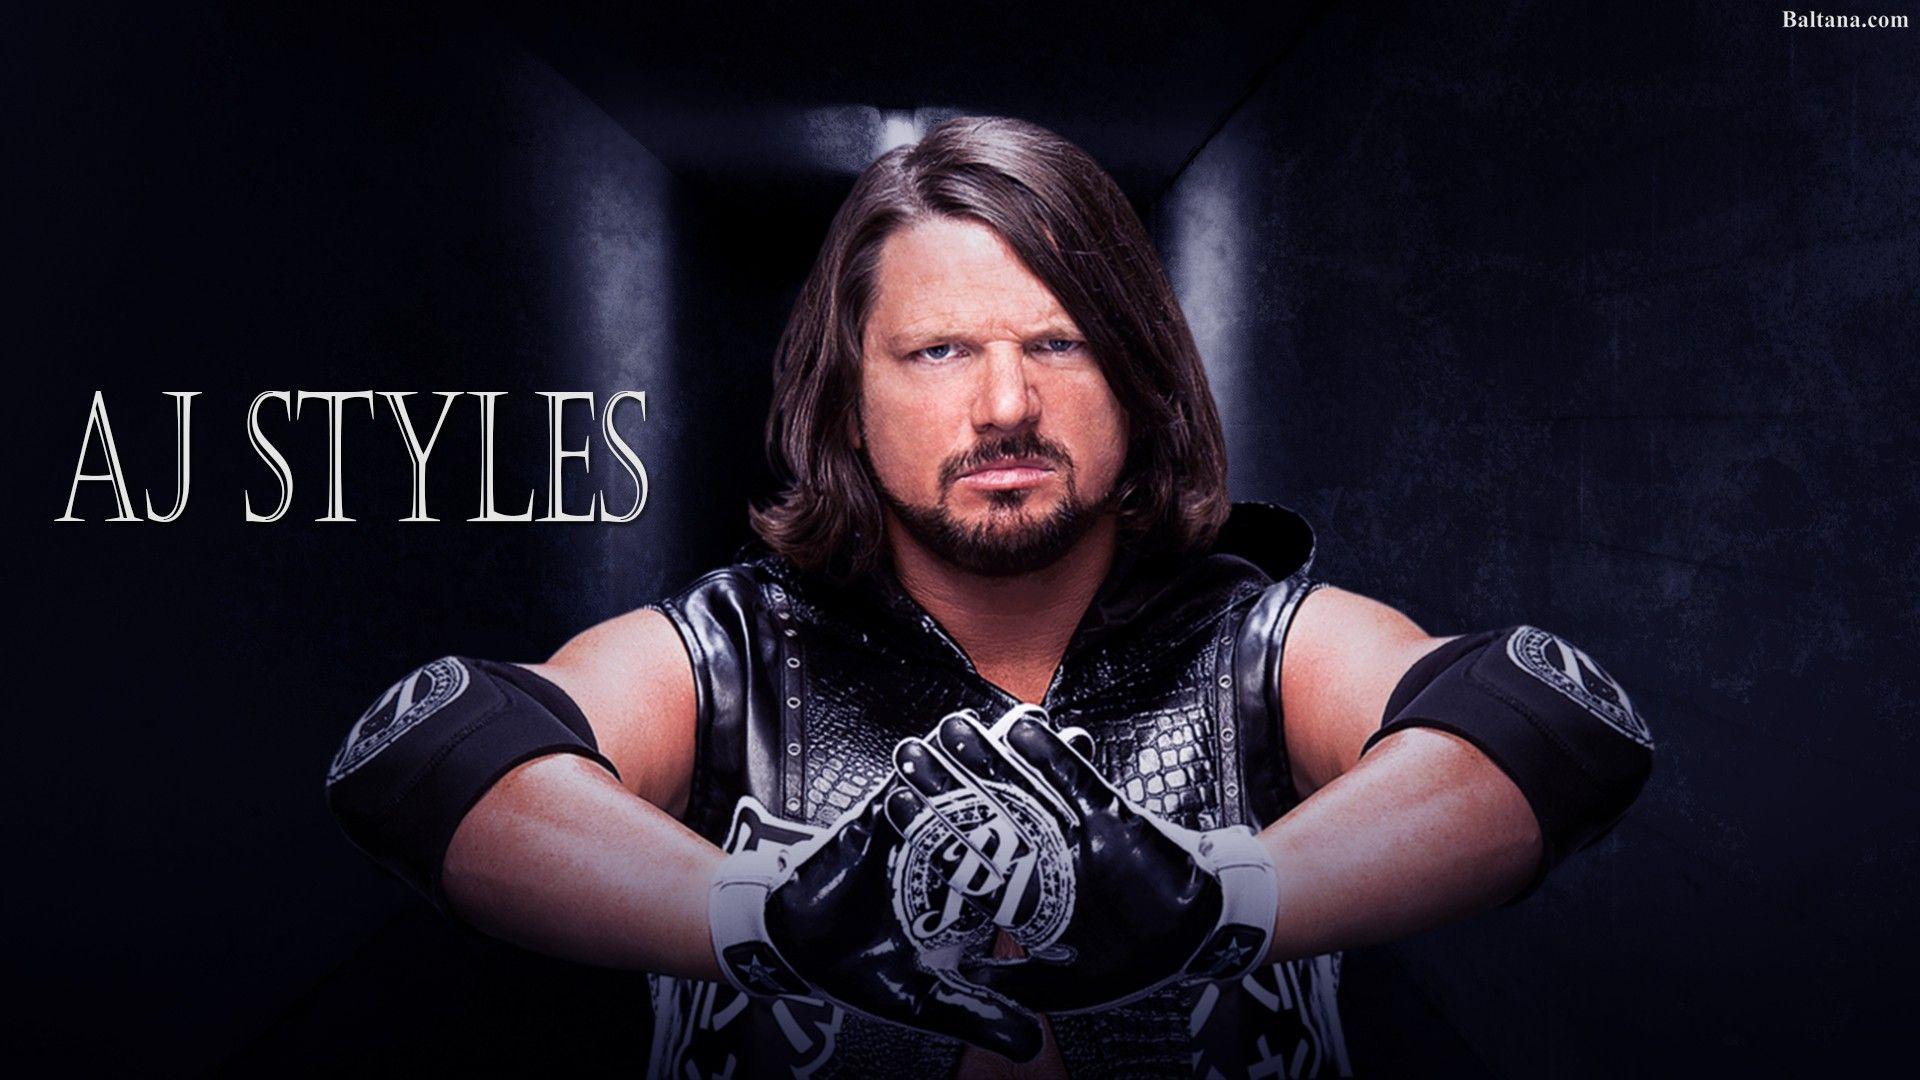 AJ Styles Wallpapers - Top Free AJ Styles Backgrounds - WallpaperAccess